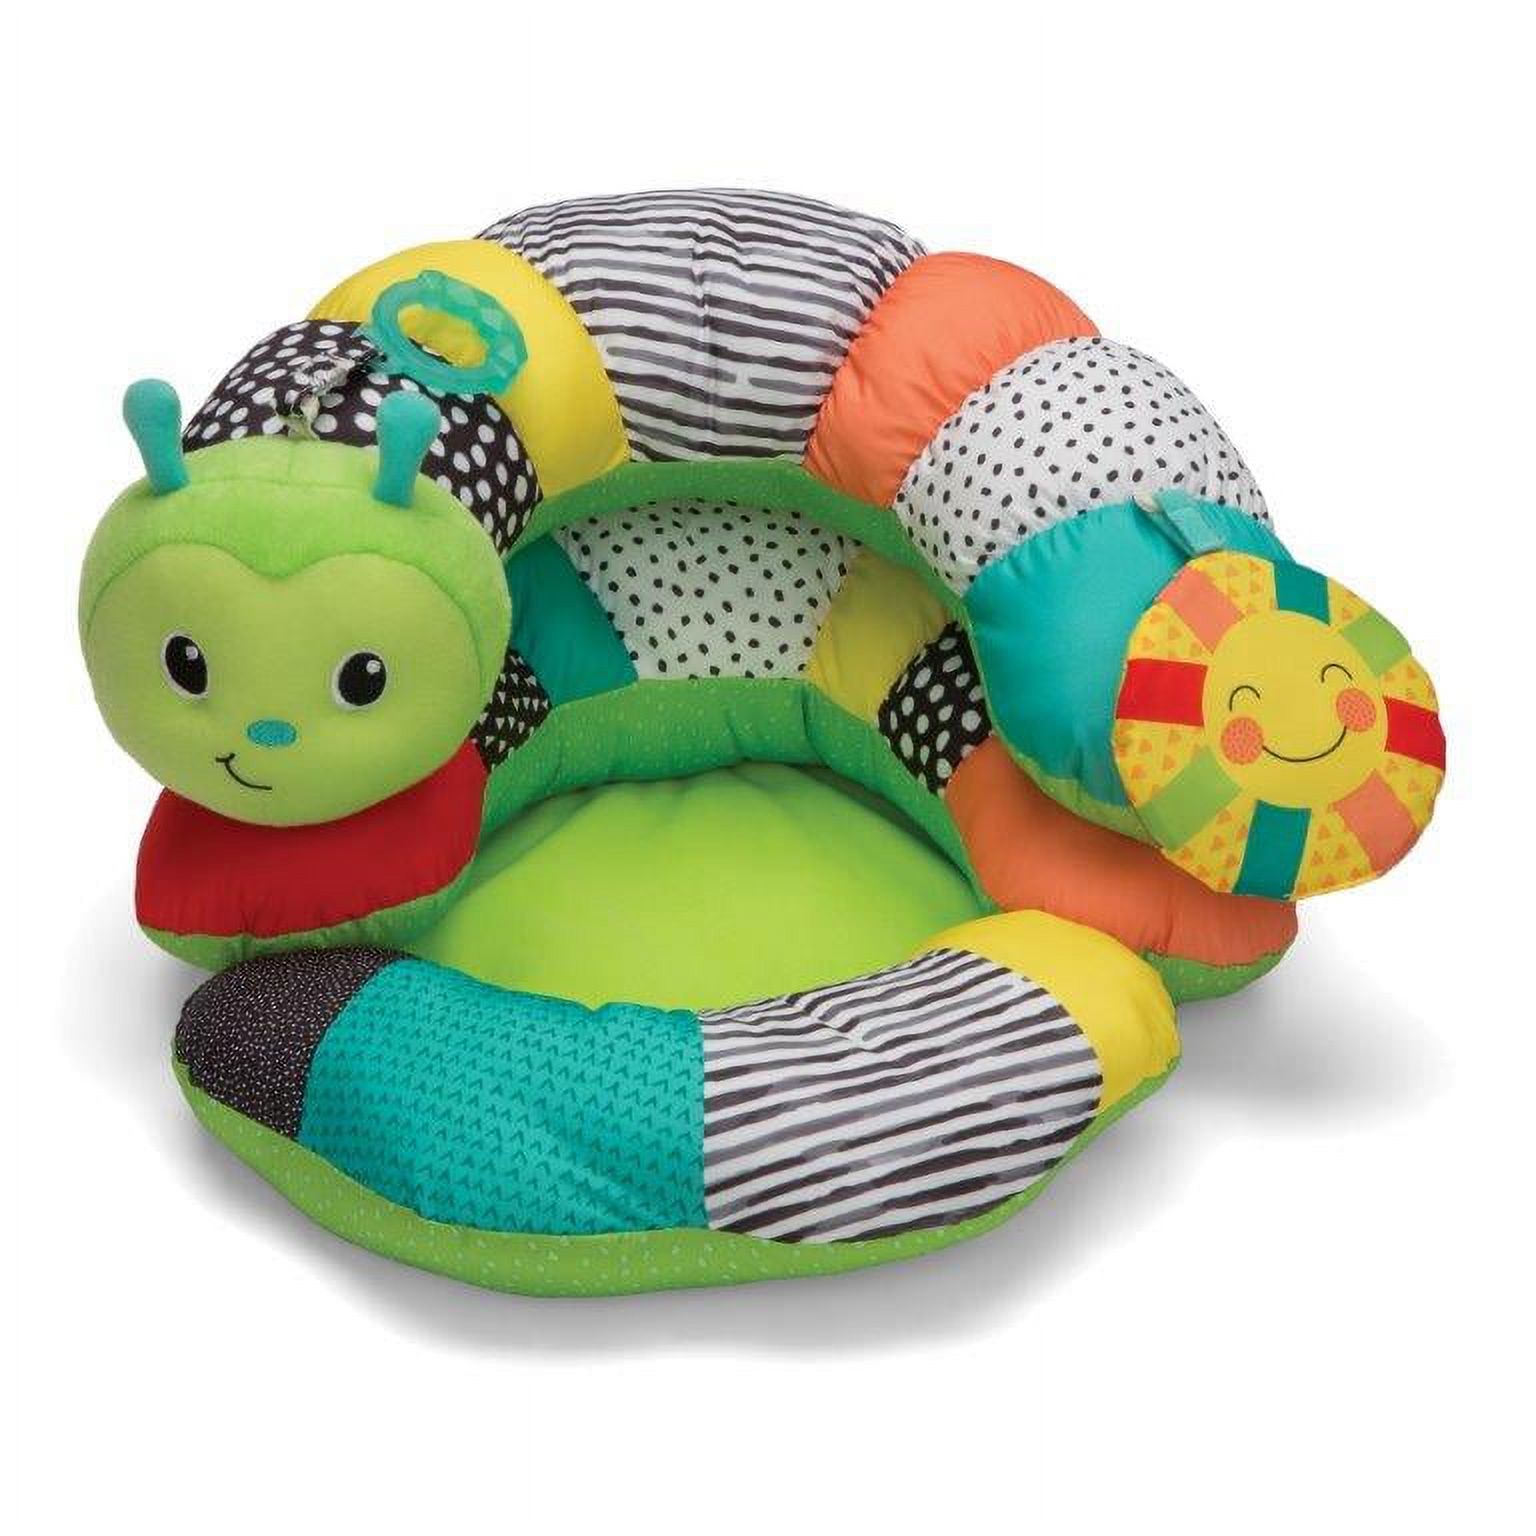 Infantino Prop-A-Pillar Tummy Time & Seated Support - image 1 of 8